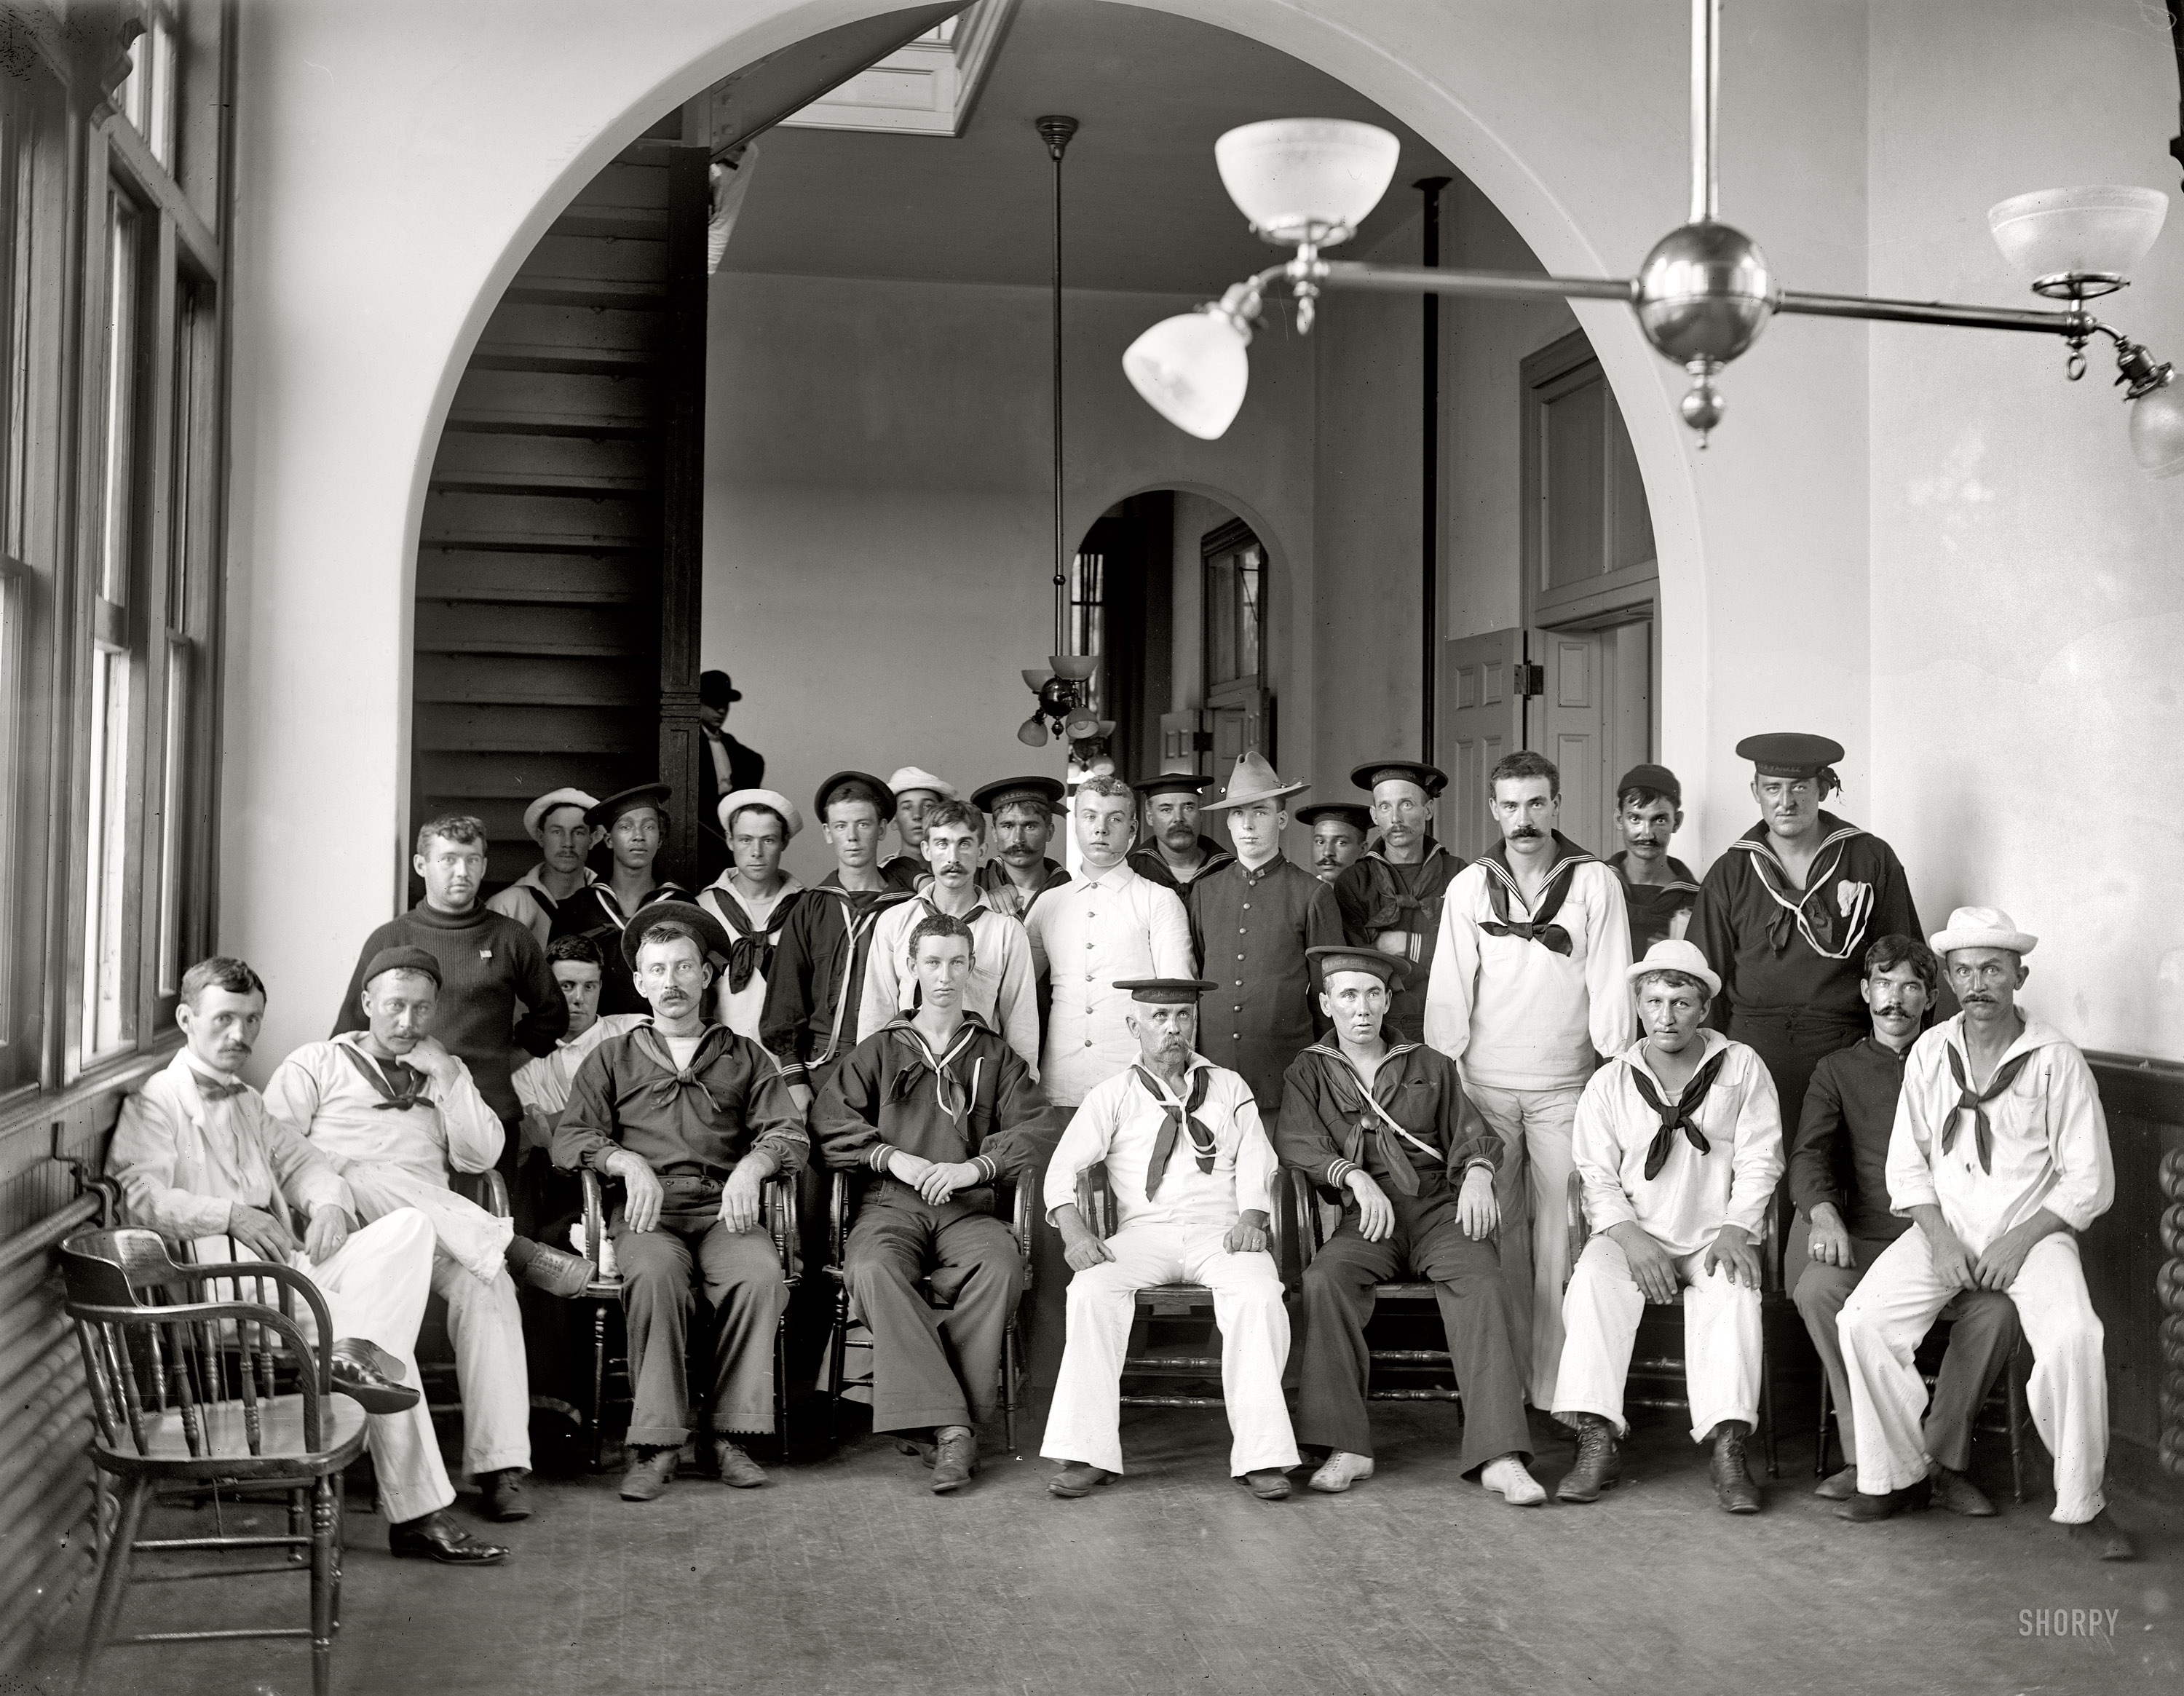 New York circa 1900. "Group of patients, Brooklyn Navy Yard hospital." 8x10 inch dry plate glass negative, Detroit Publishing Company. View full size.